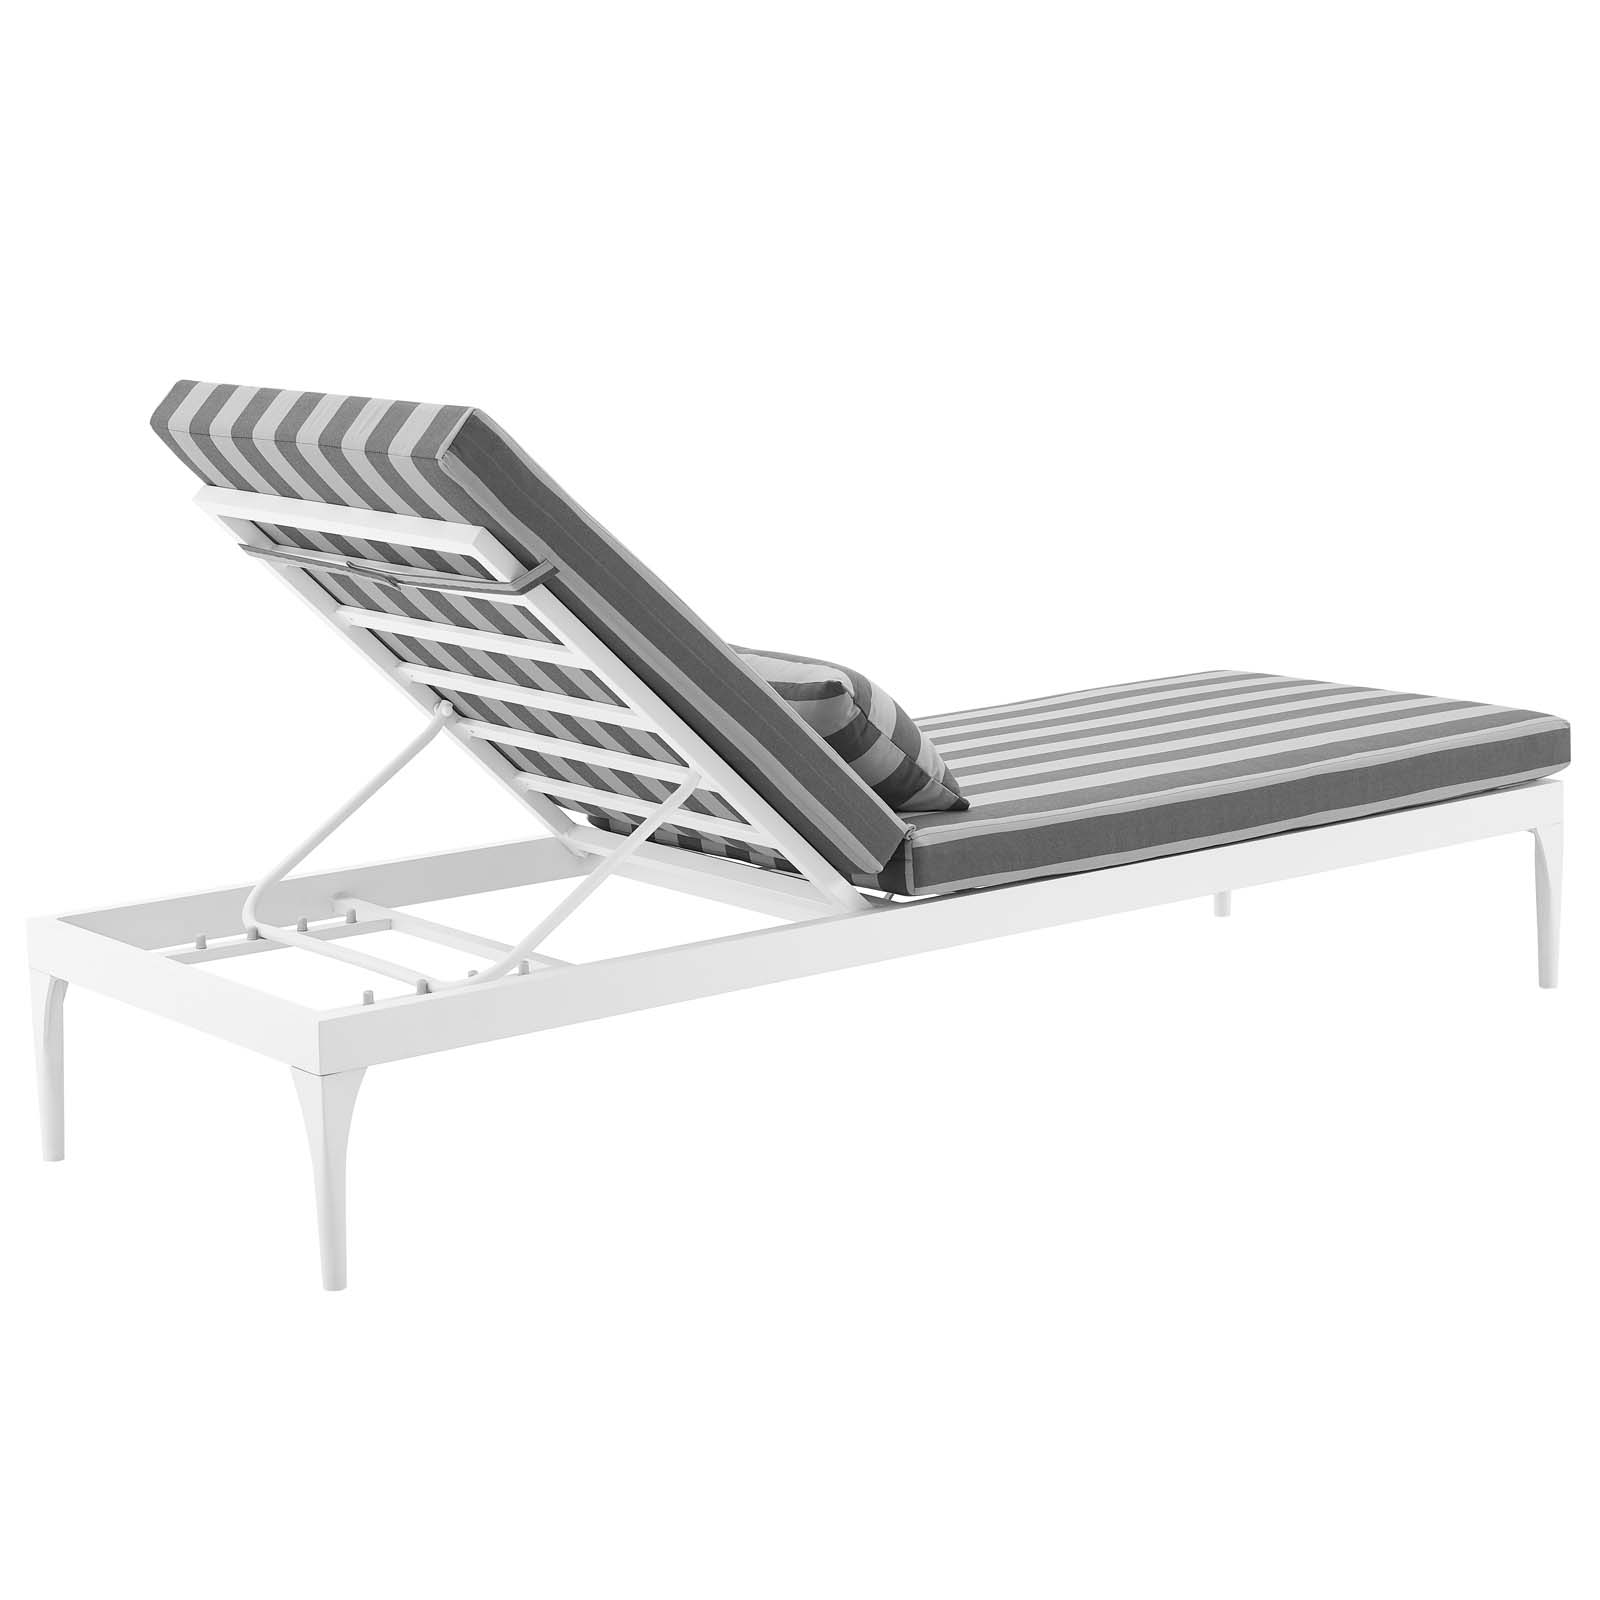 Modern Contemporary Urban Design Outdoor Patio Balcony Garden Furniture Lounge Chair Chaise, Fabric Metal Steel, White Grey Gray - image 3 of 7